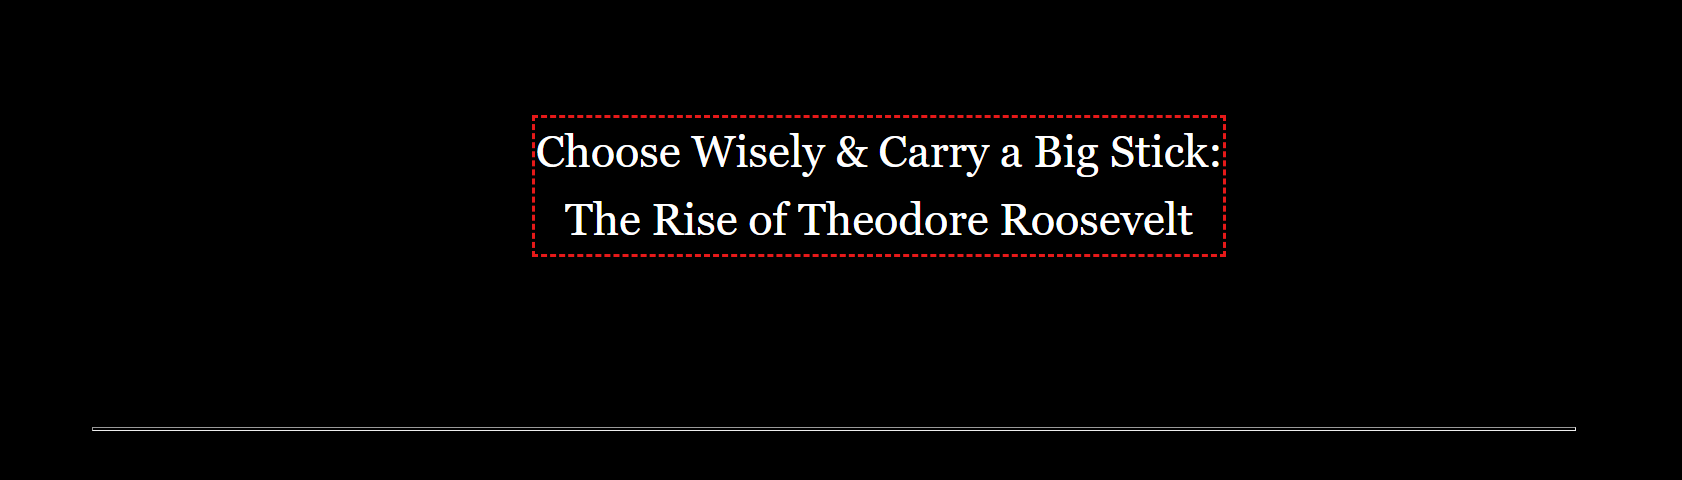 Choose Wisely & Carry a Big Stick: The Rise of Theodore Roosevelt